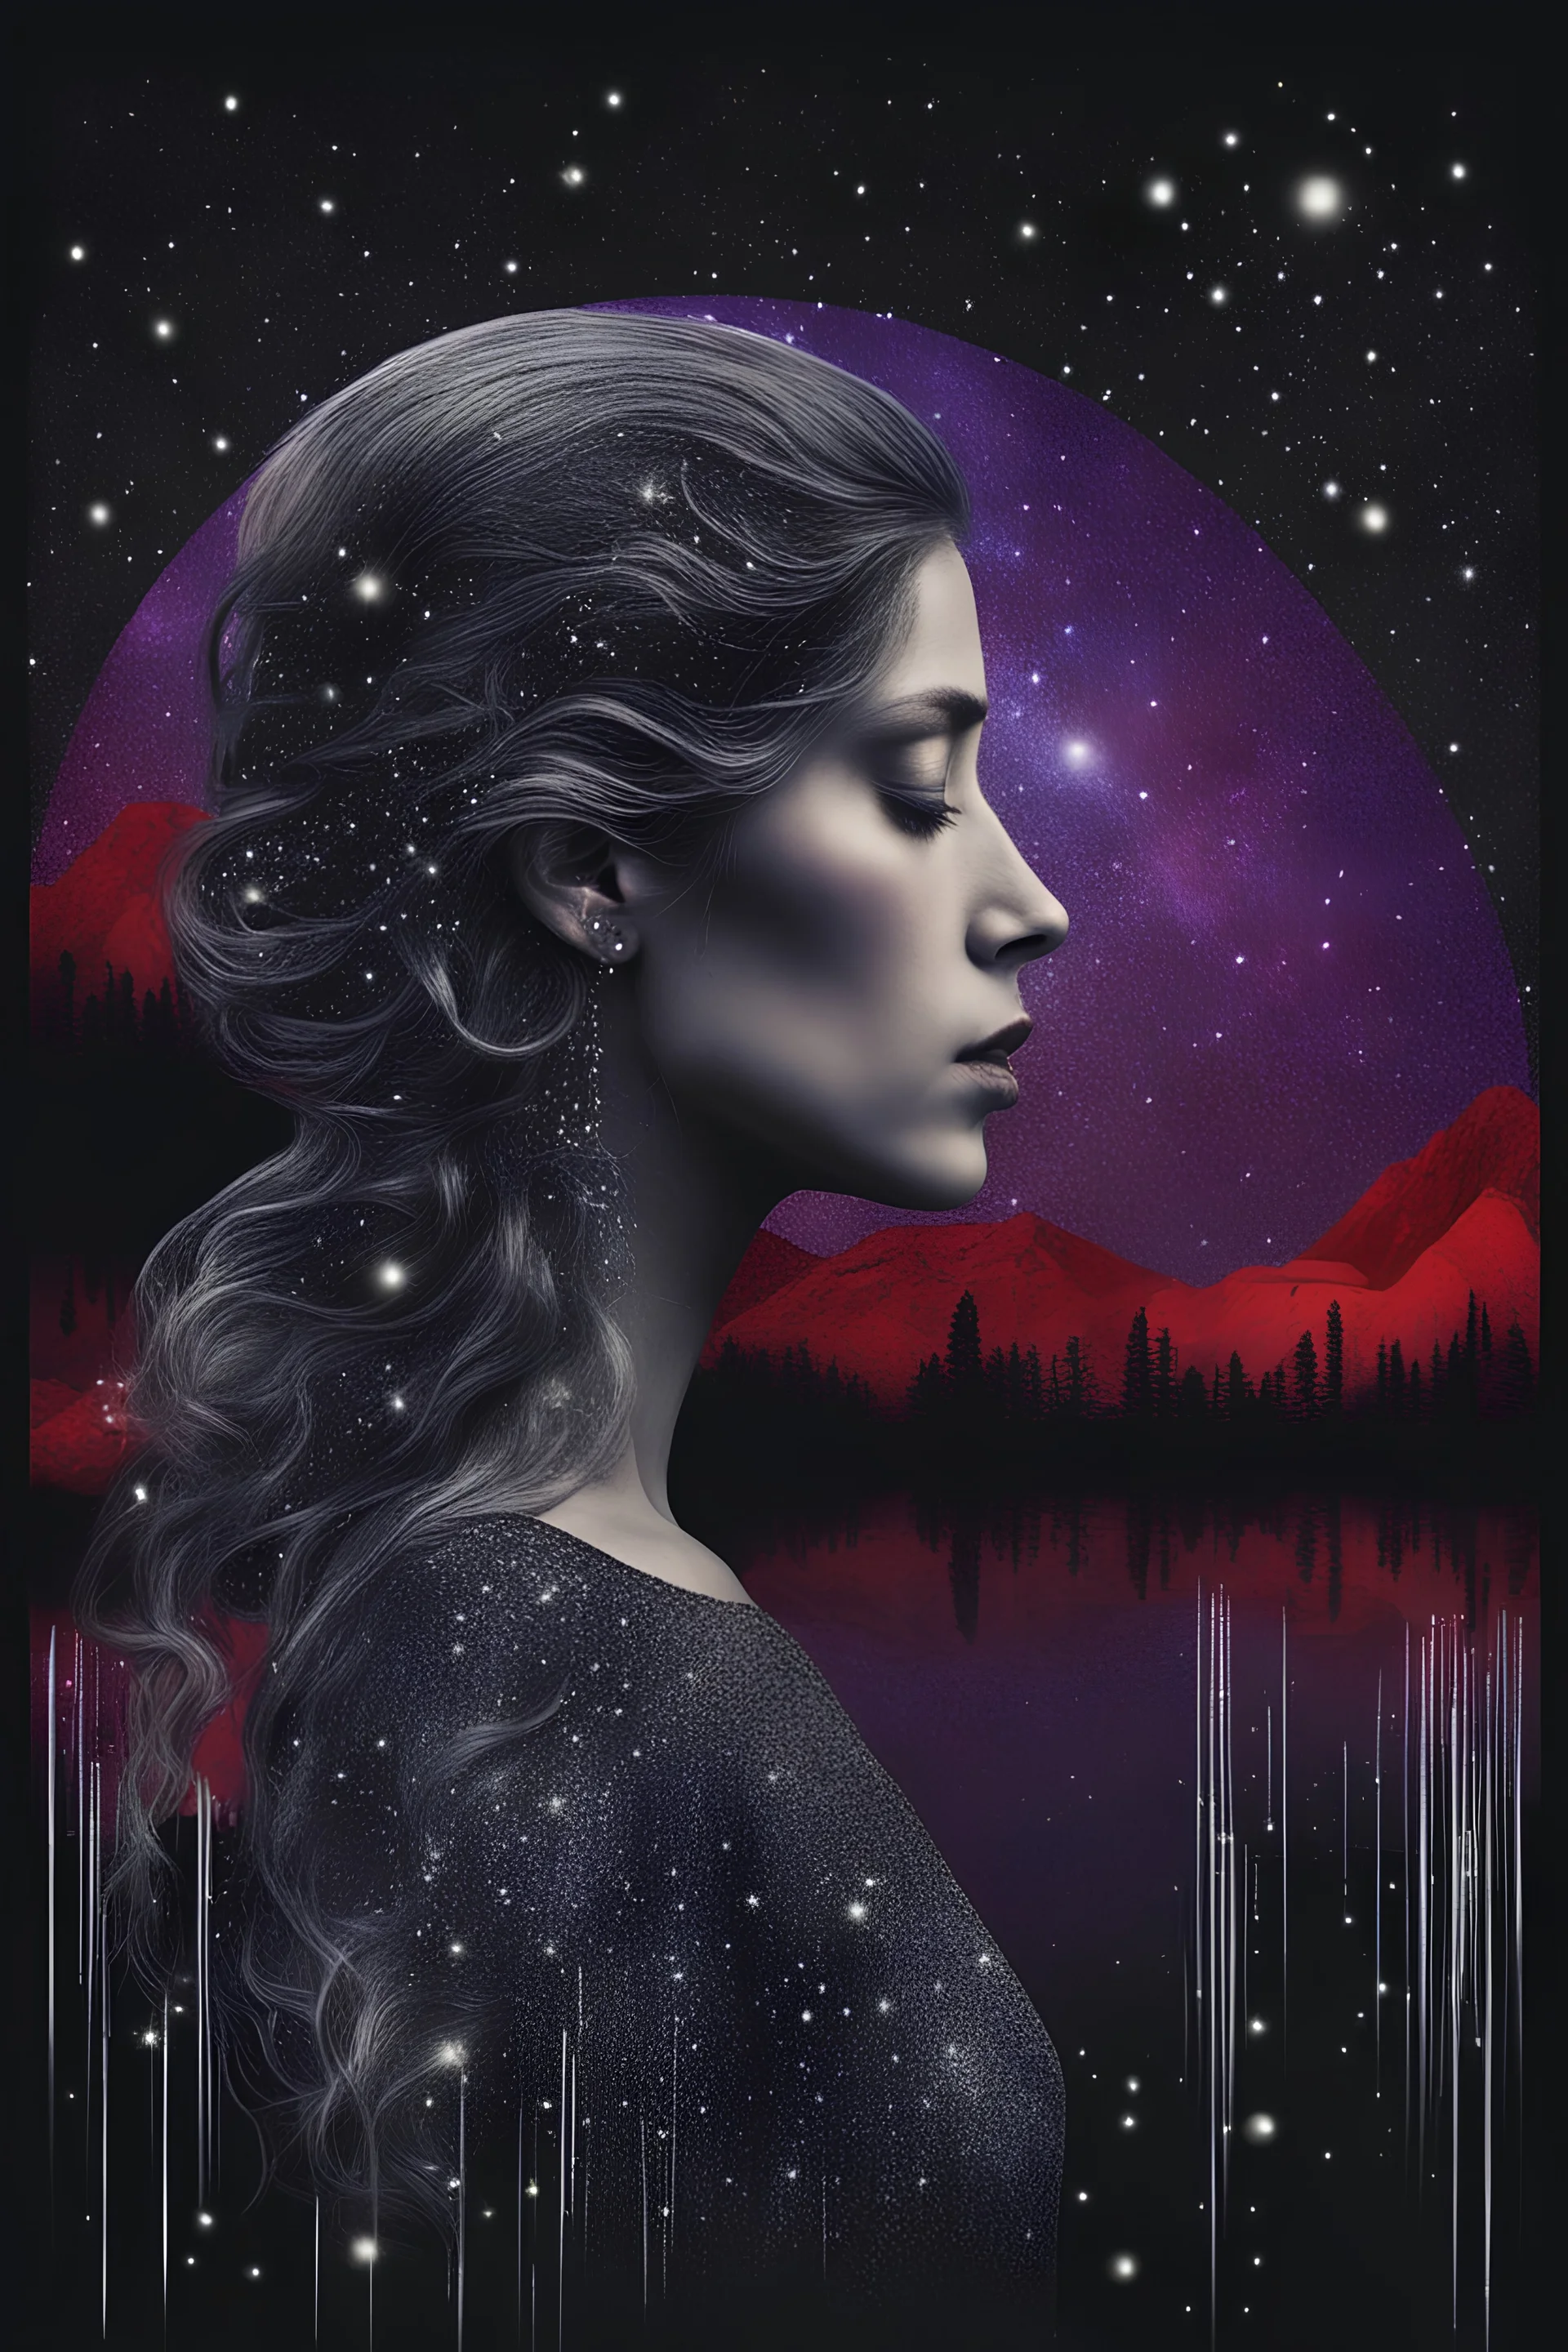 Double exposure of a female person's profile and a utopistic starry night sky, dramatic mood, dark depressive style, highlySurreal reflection, dark, melancholic, purple, gray, red, black colors, surreal abtractions, strange things, Kandinsky world detailed intricate, surreal, stunning,